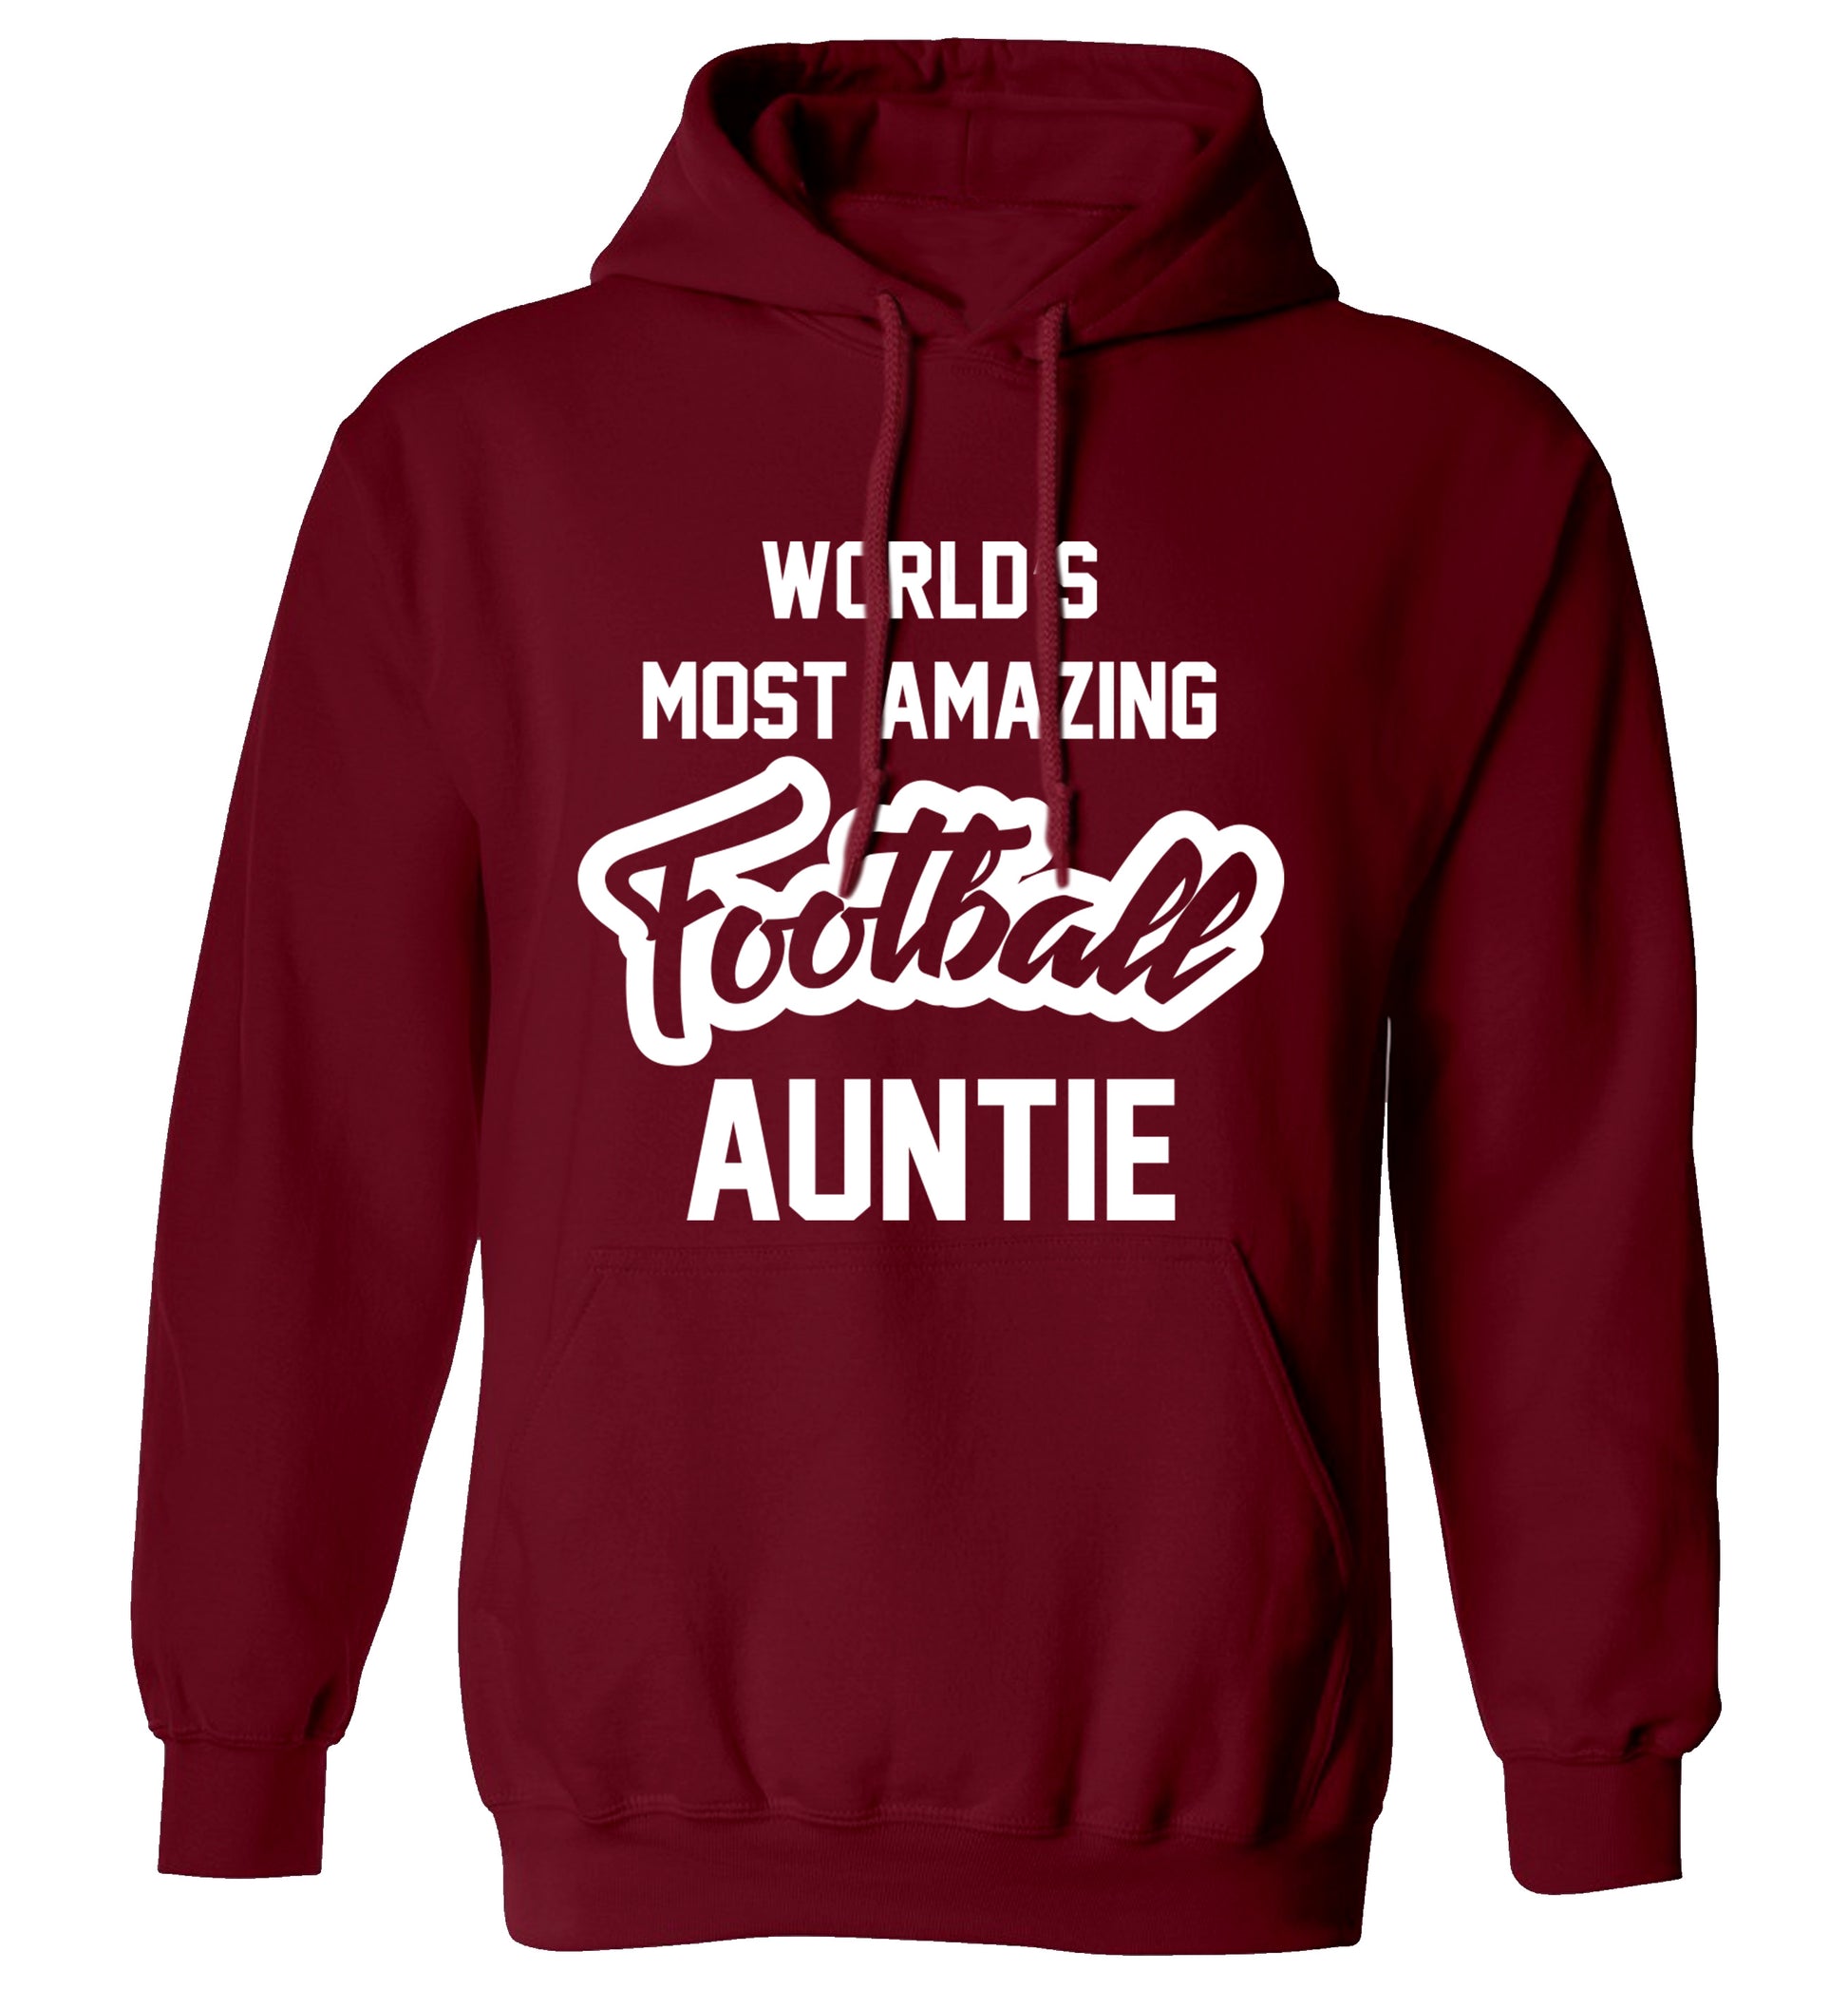 Worlds most amazing football auntie adults unisexmaroon hoodie 2XL